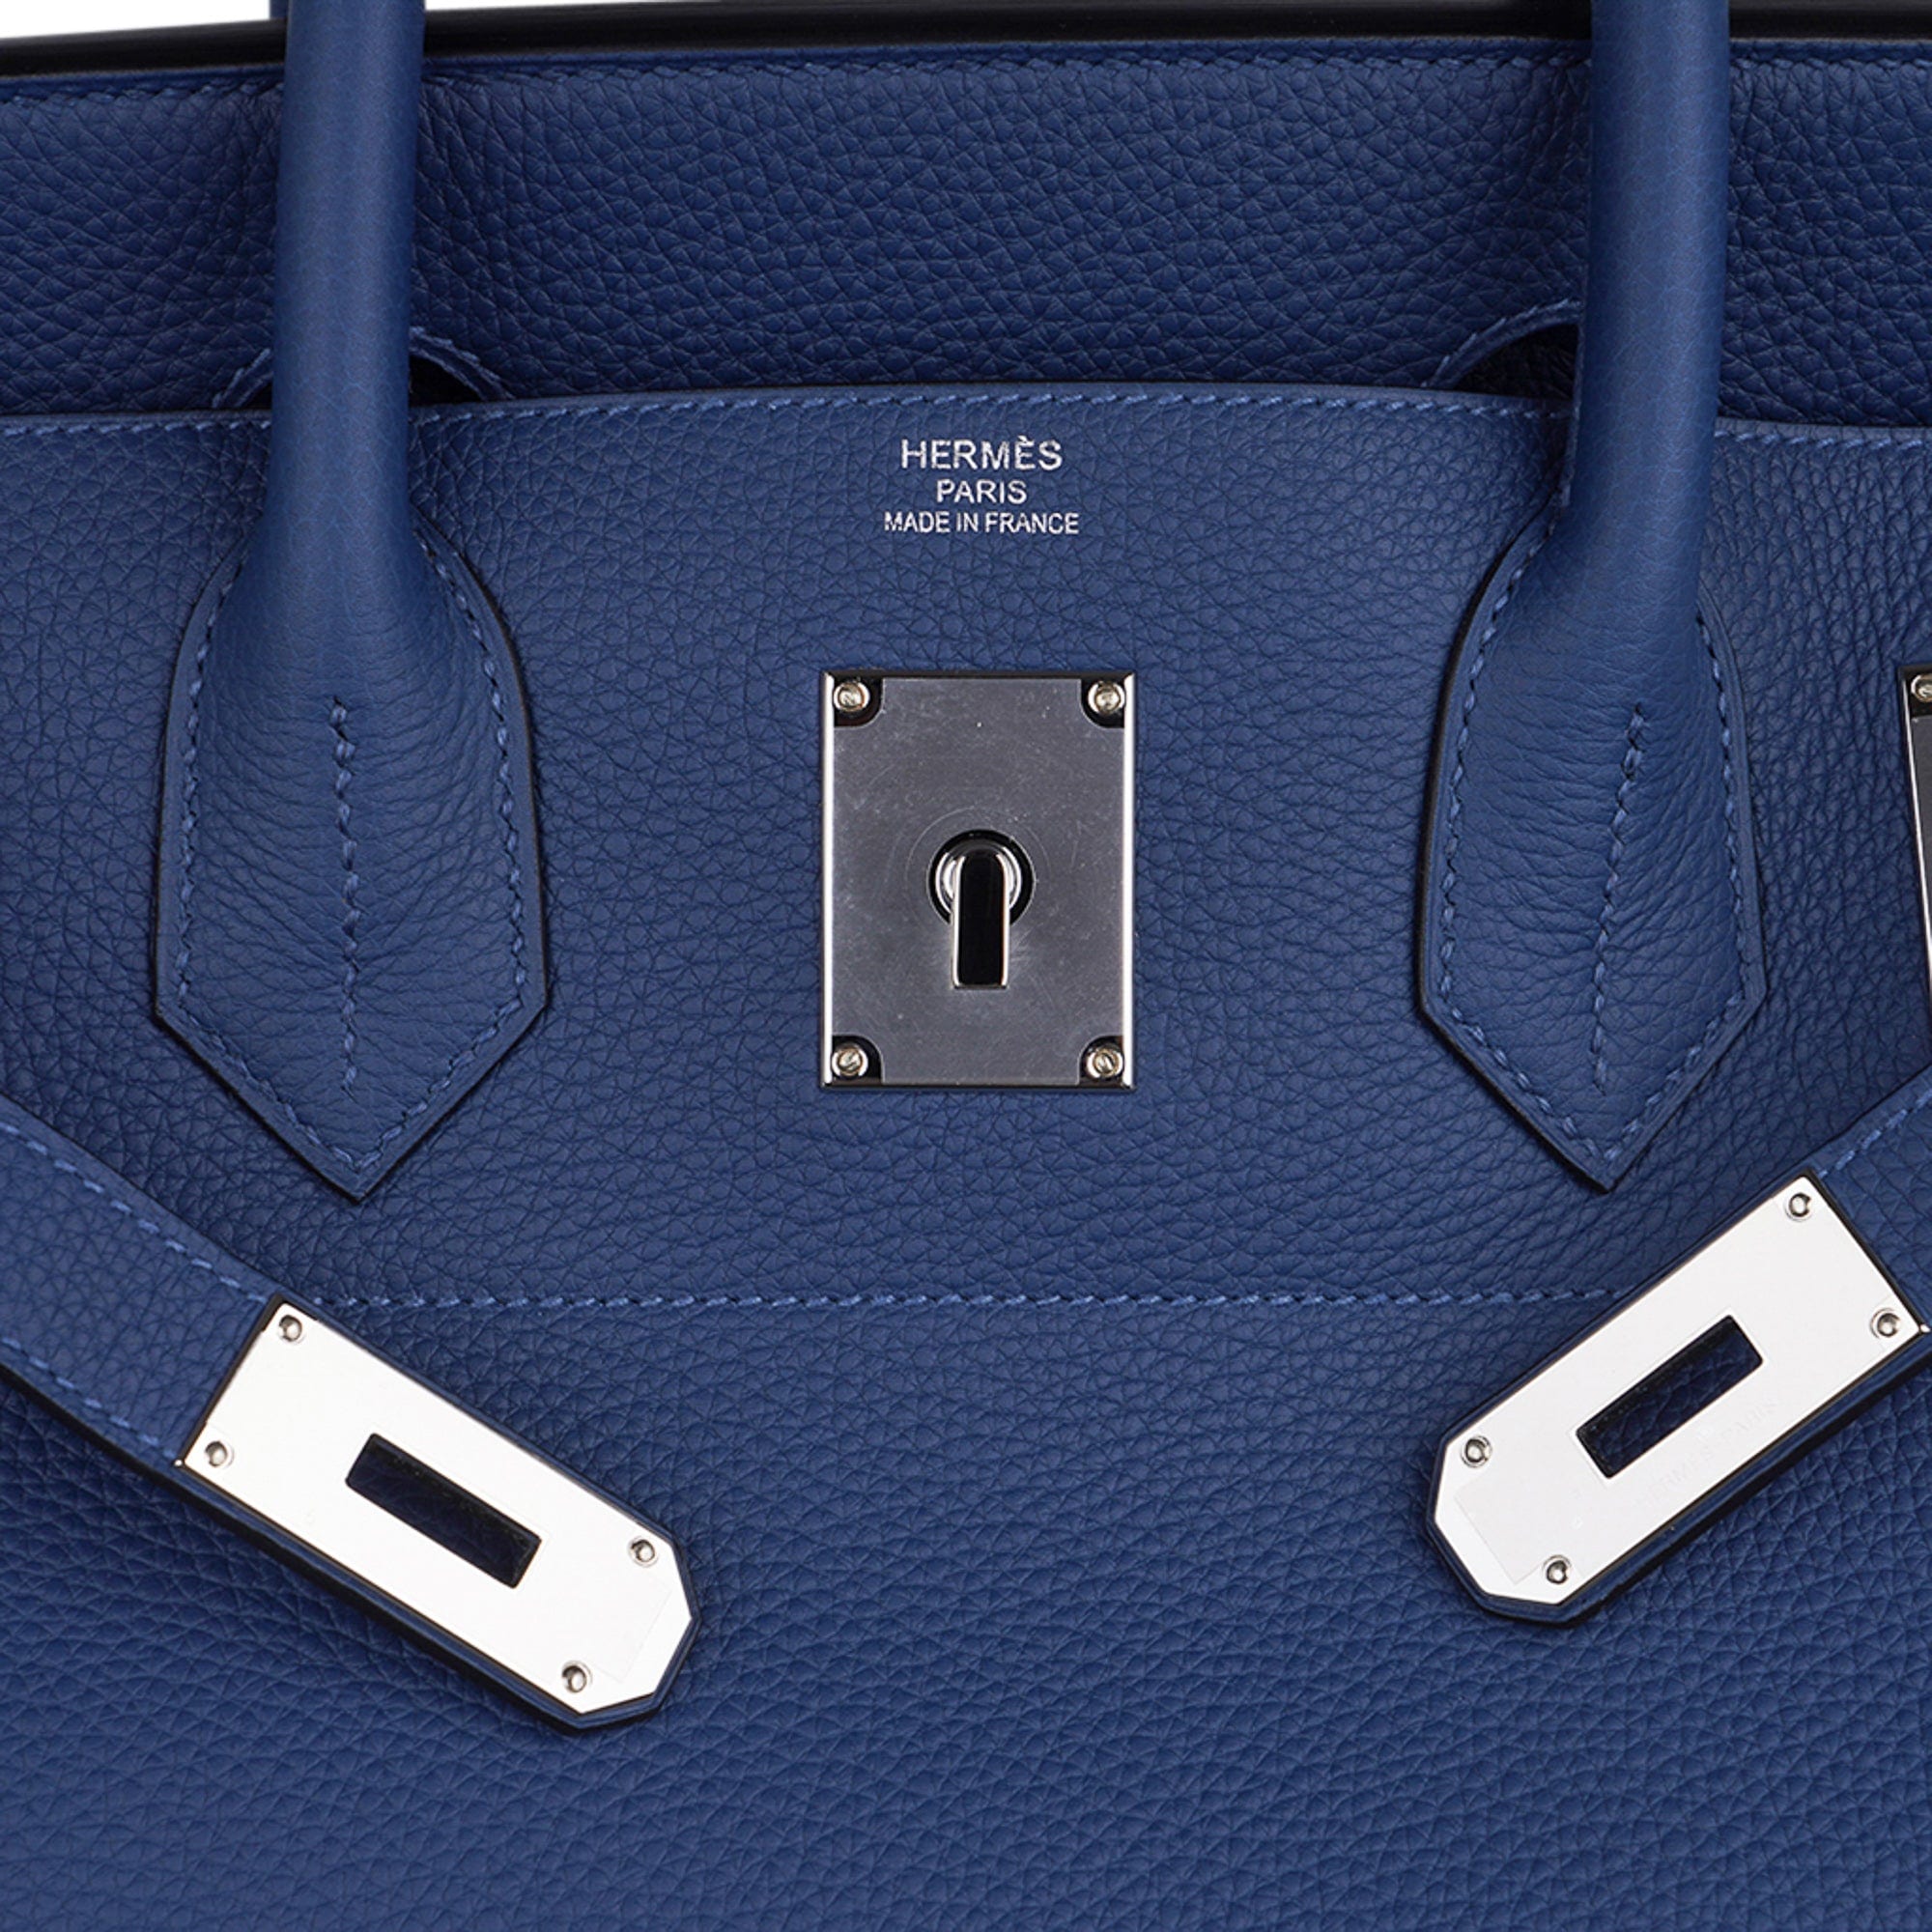 Hermes Birkin Hac 40 Bag 2Z Bieu Nuit And N7 Blue Tempete And 3P Blue Atoll